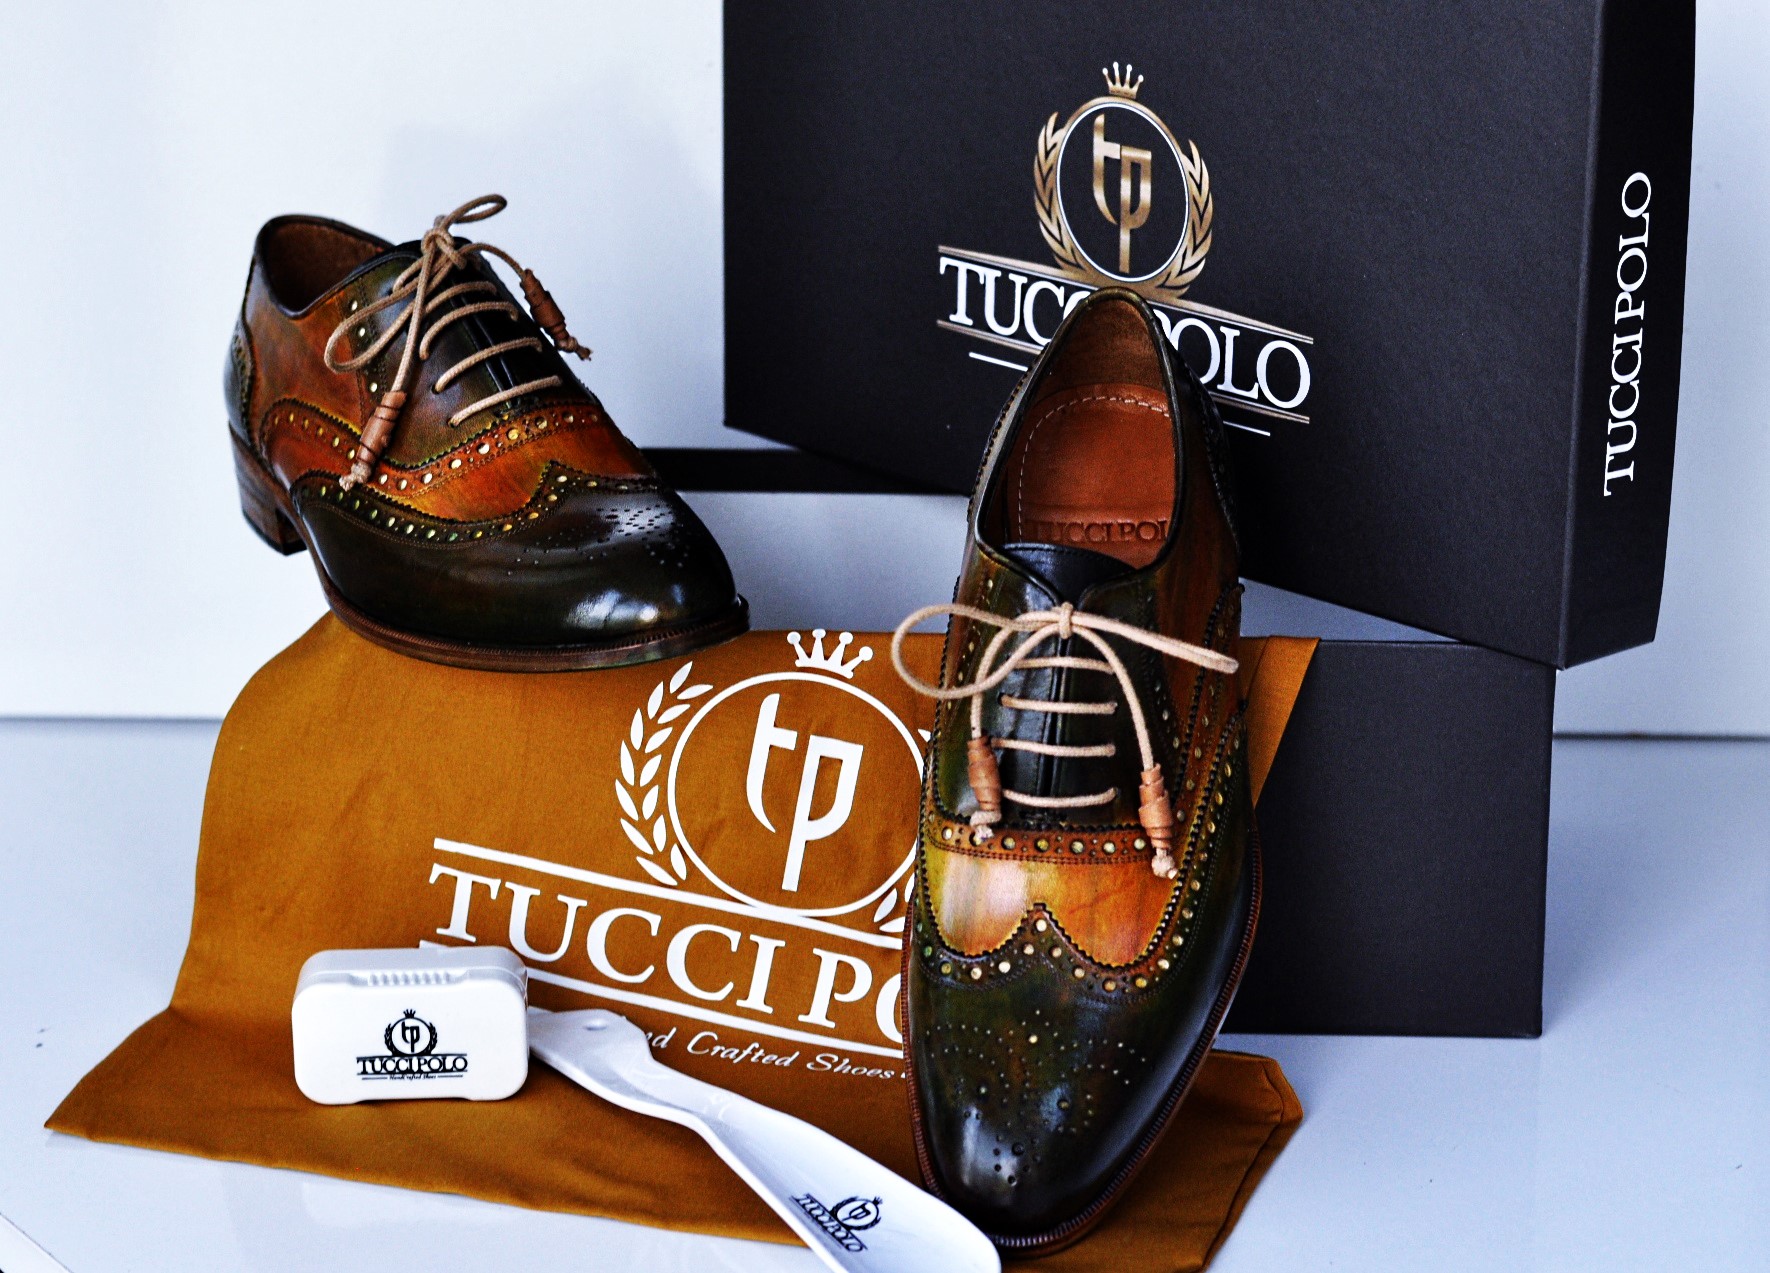 TucciPolo Luxury Shoes